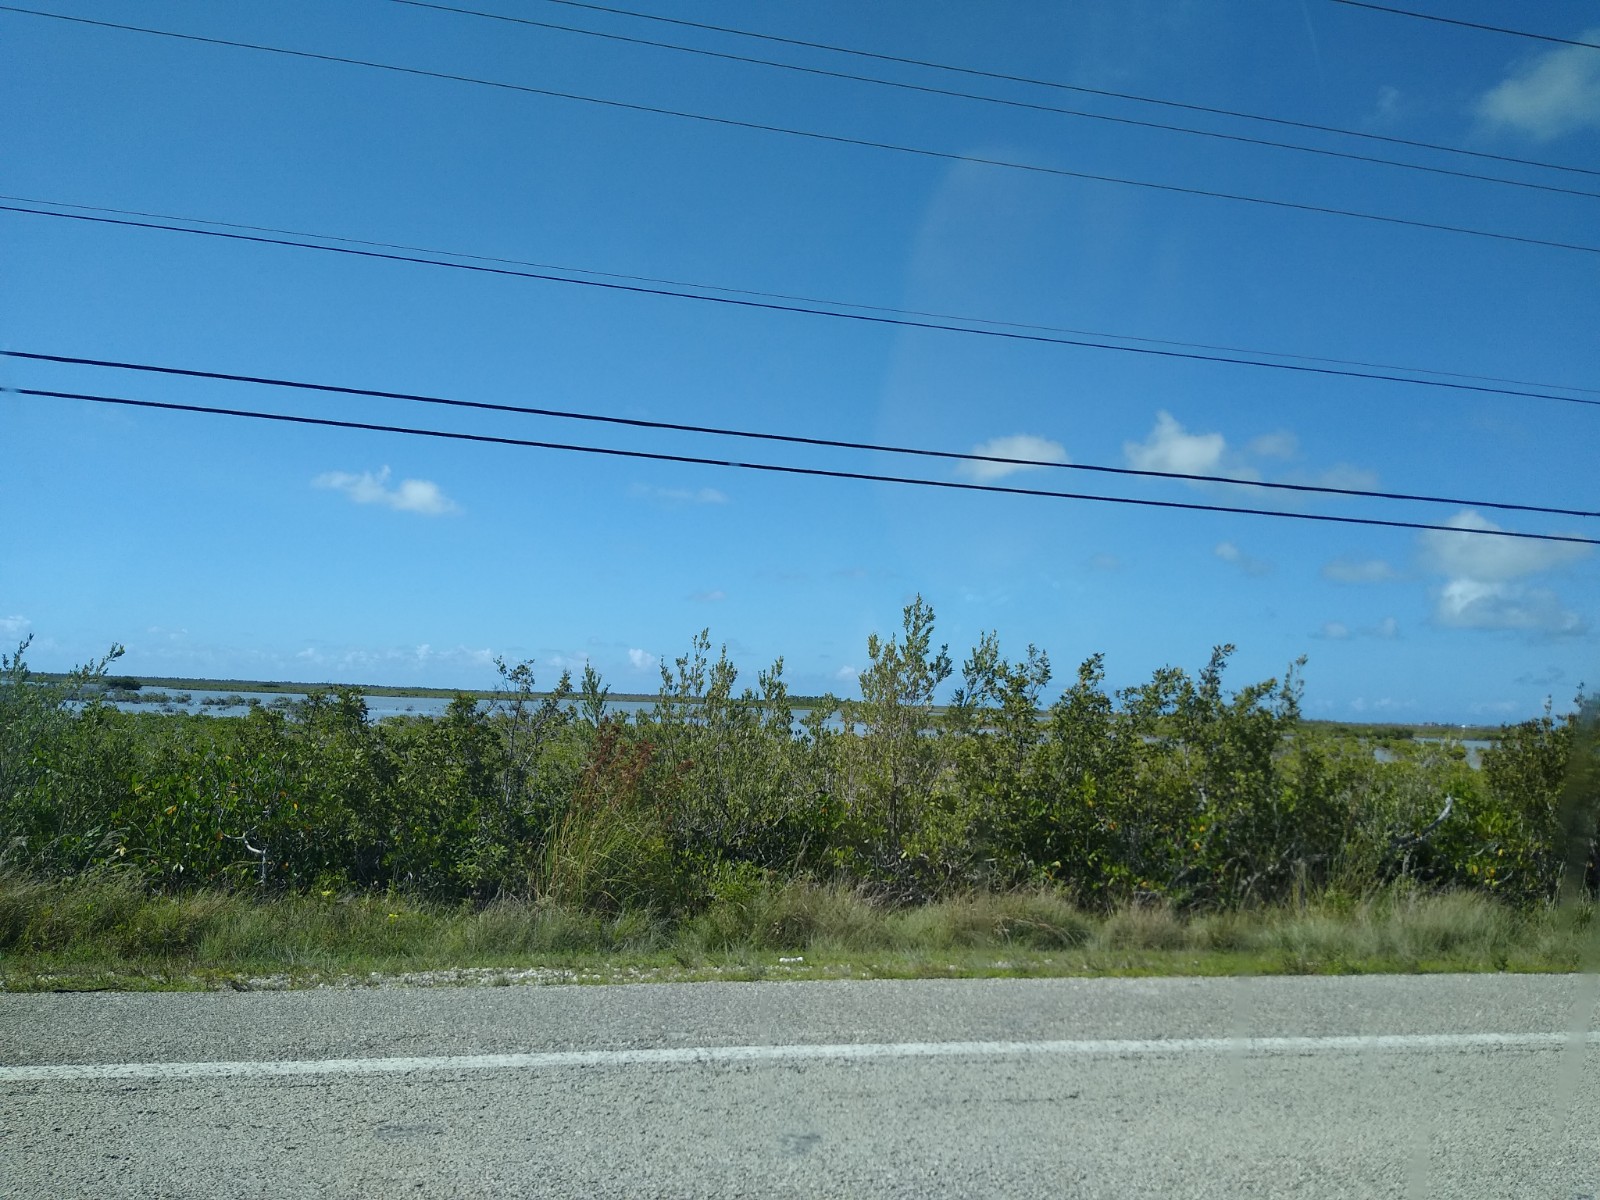 Driving along the Overseas Highway